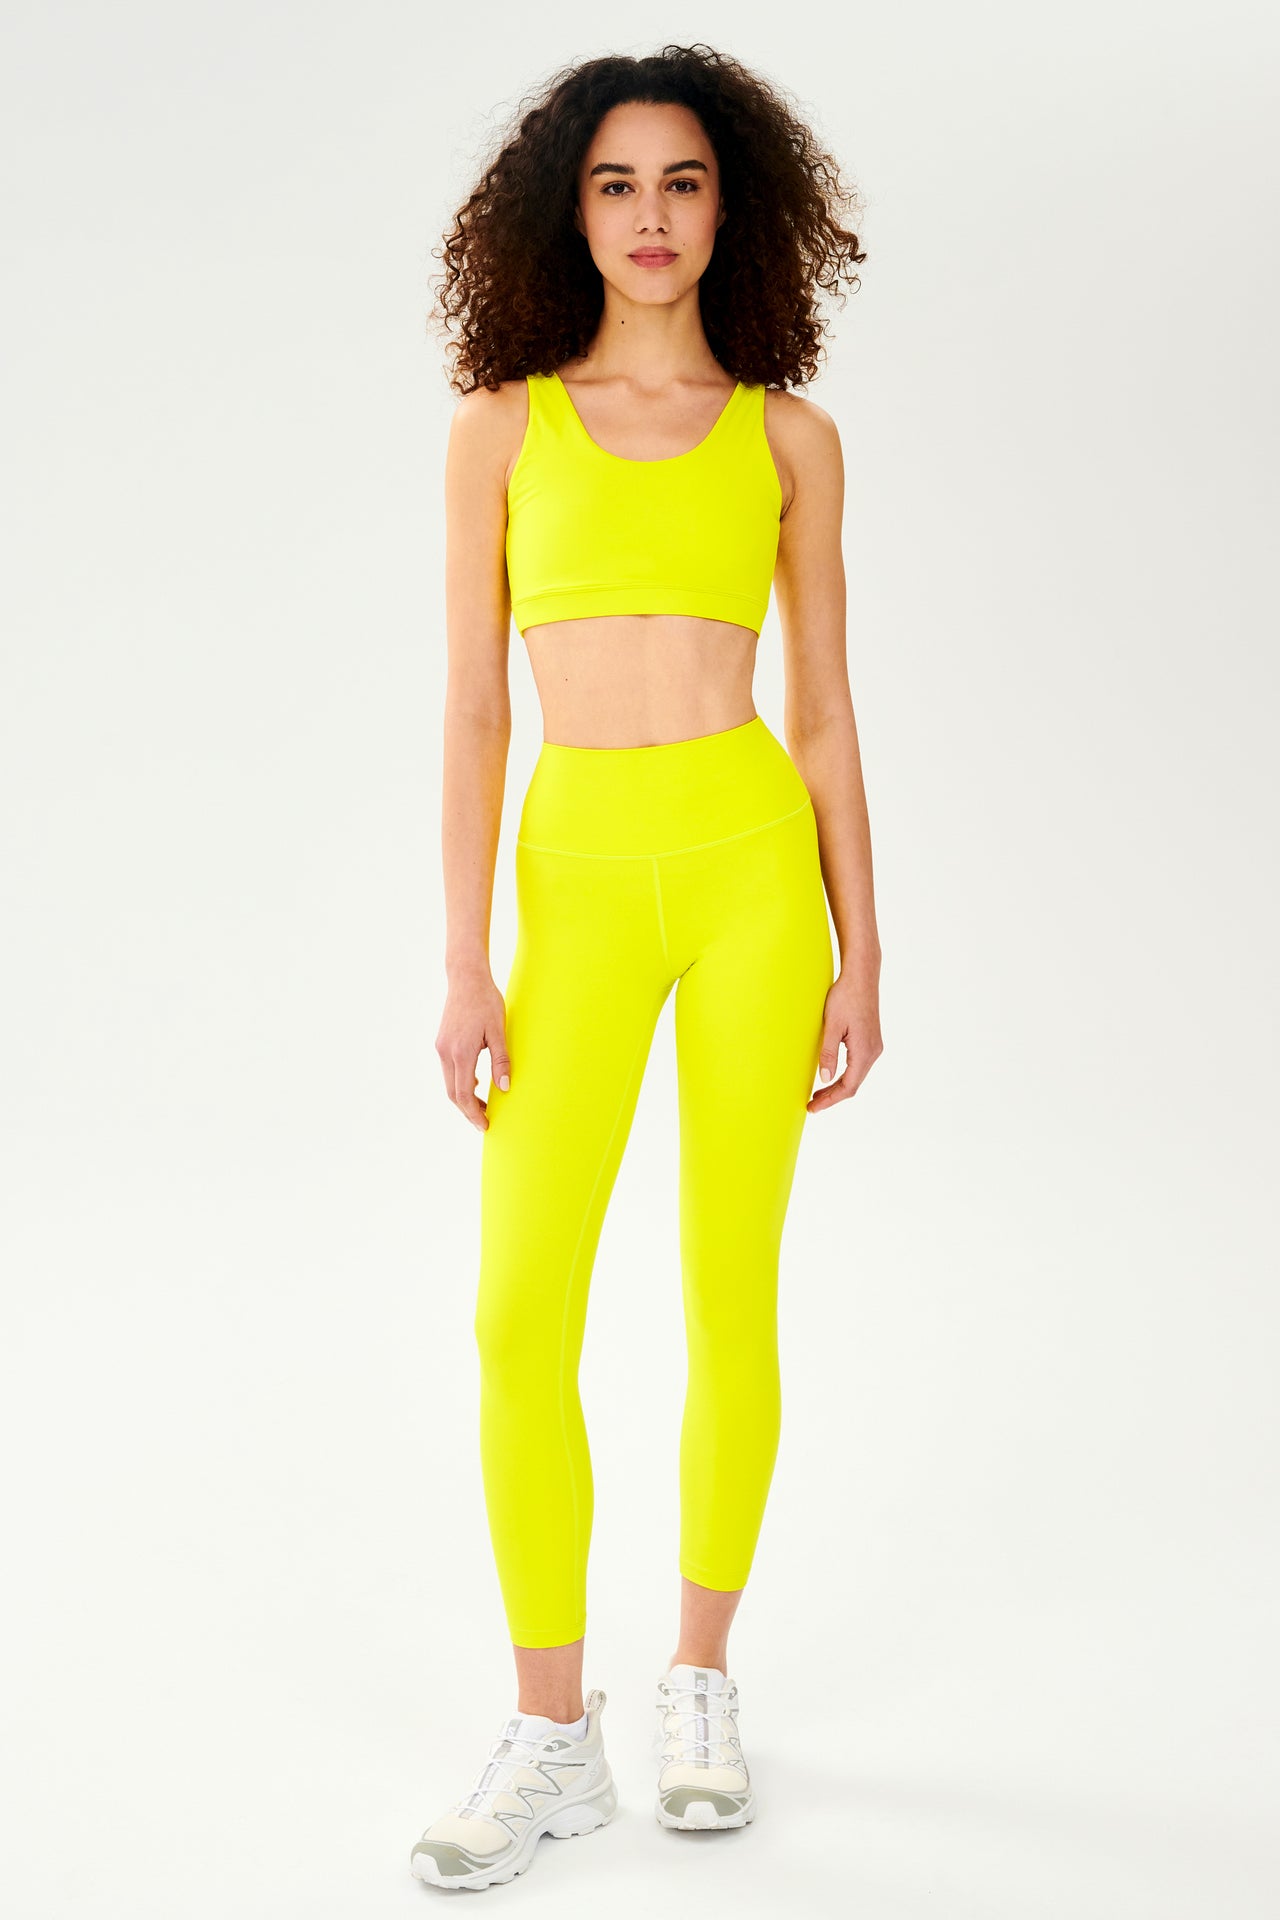 Front full view of woman with curly dark wearing bright yellow bra with bright yellow leggings and white shoes